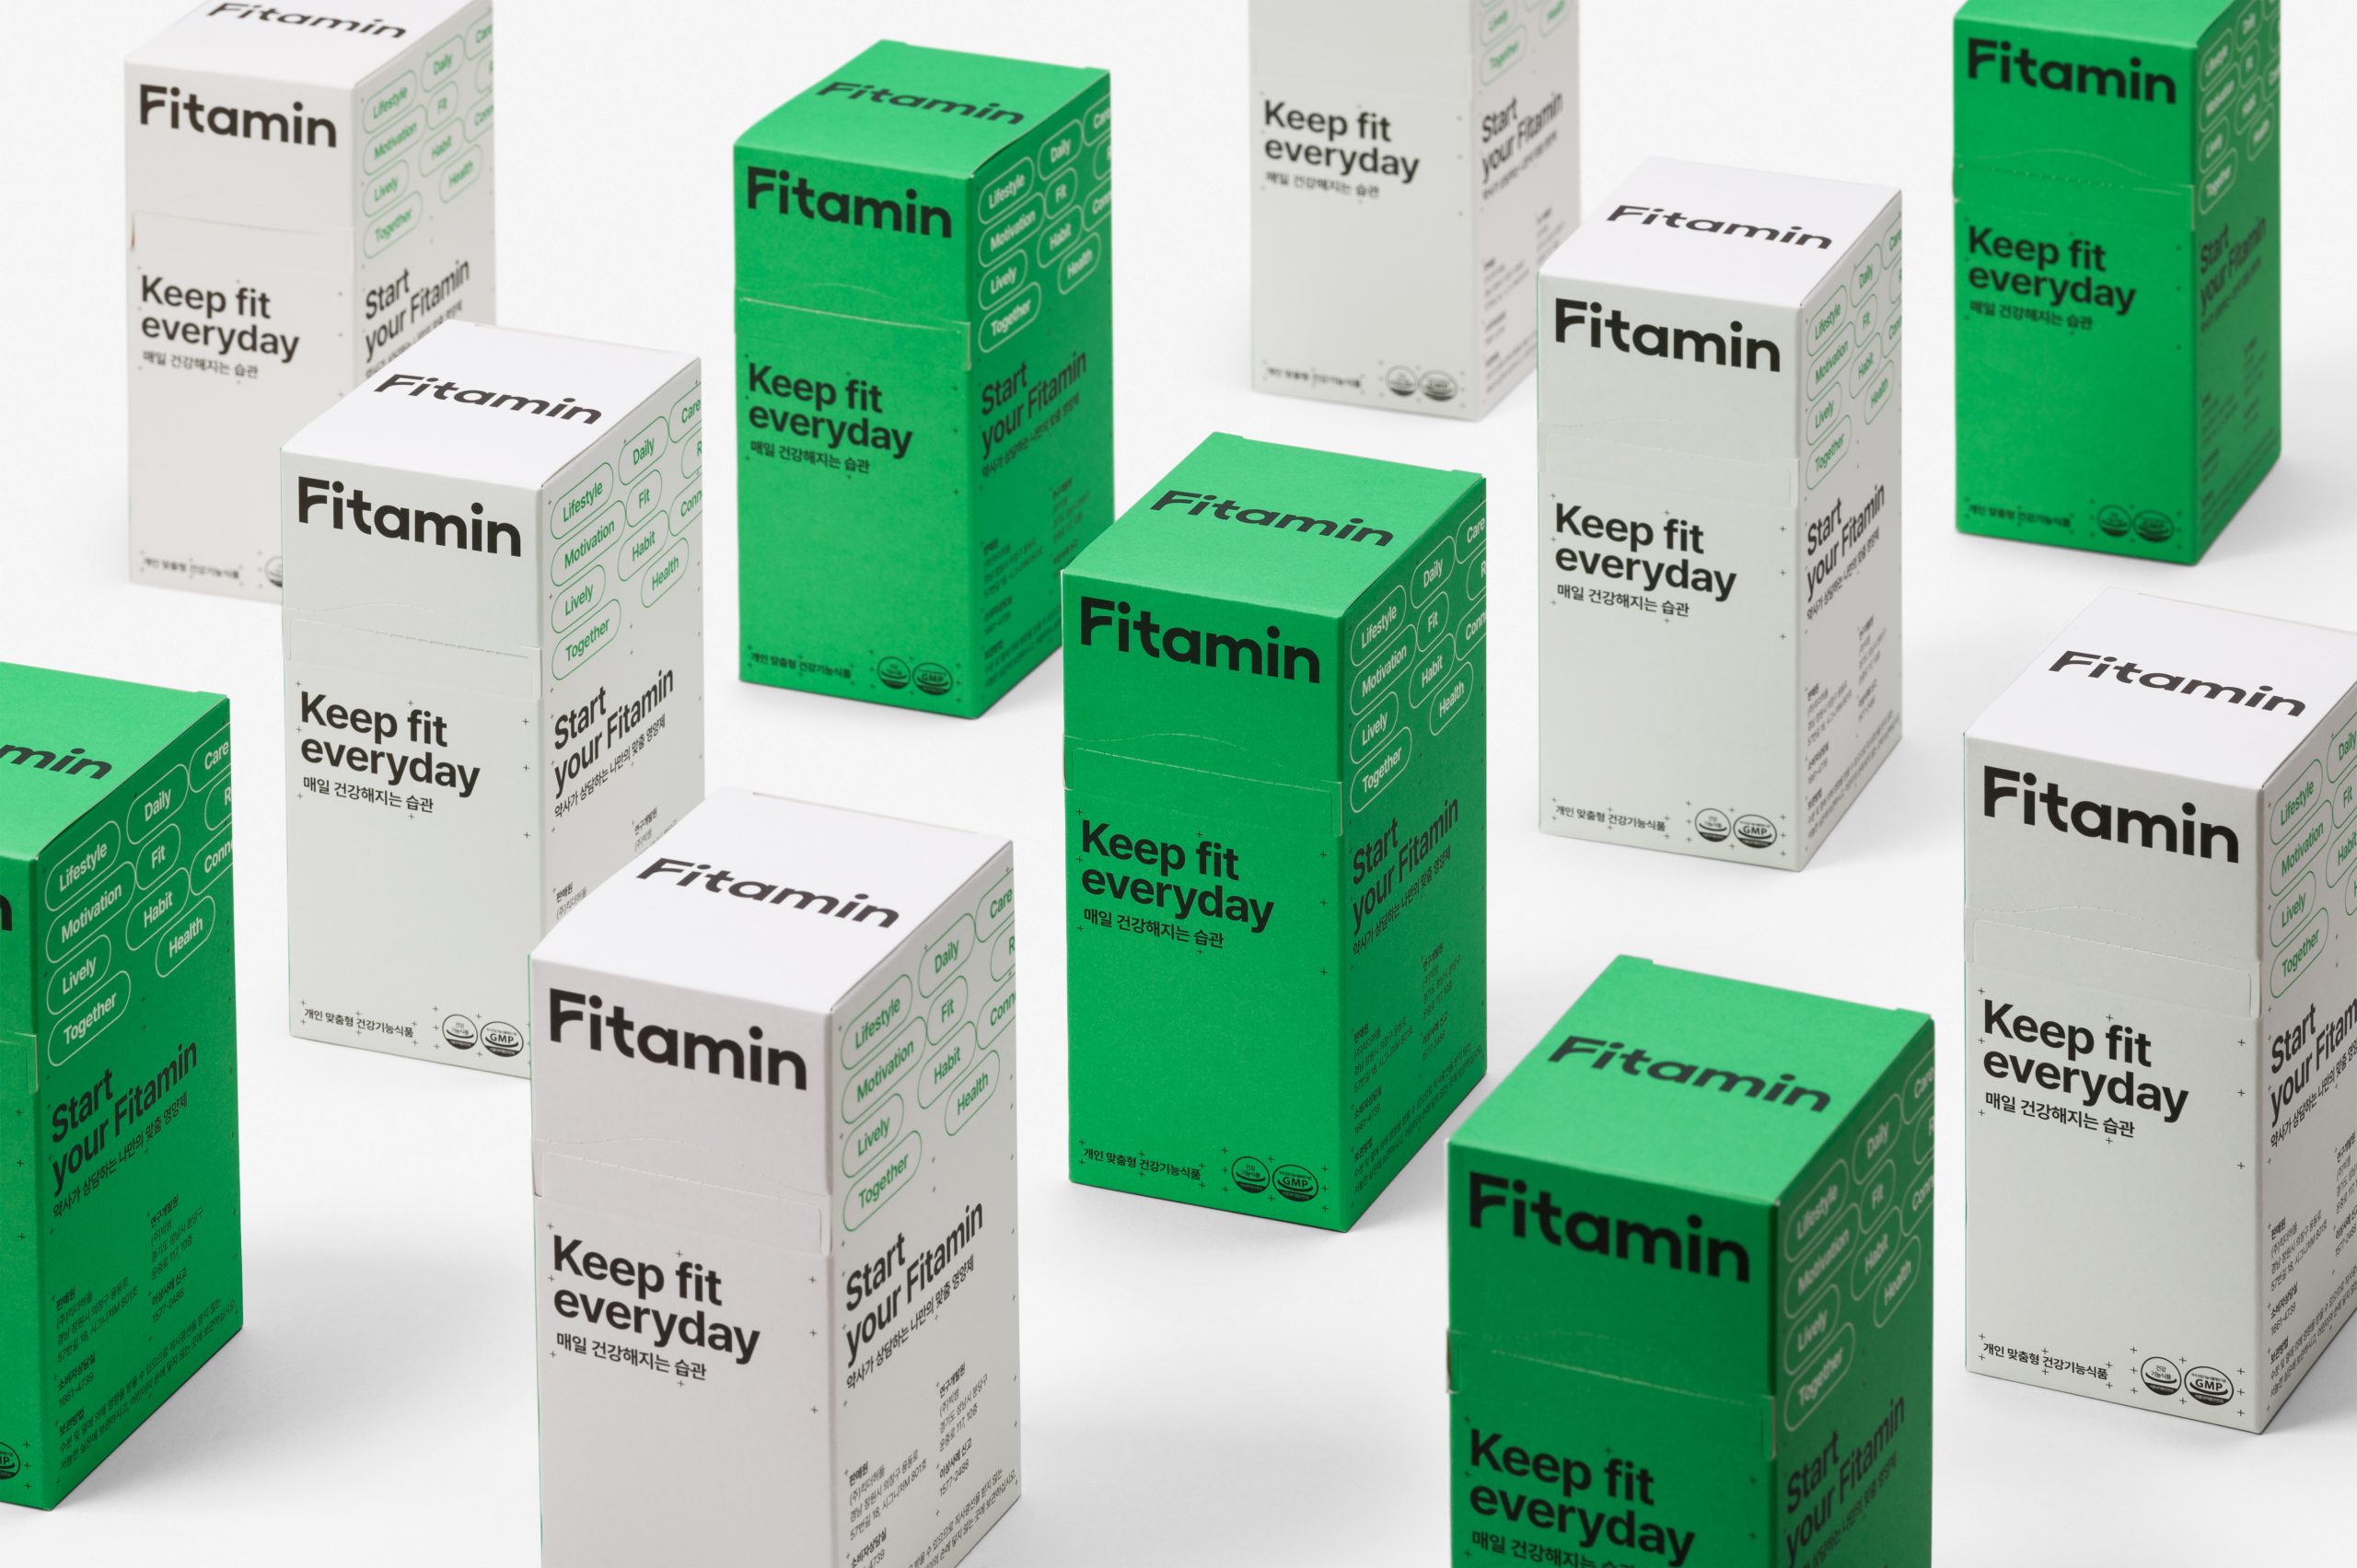 Korean Supplement Brand Fitamin’s Sleek, Efficient Look Isn’t Afraid to Play with Color